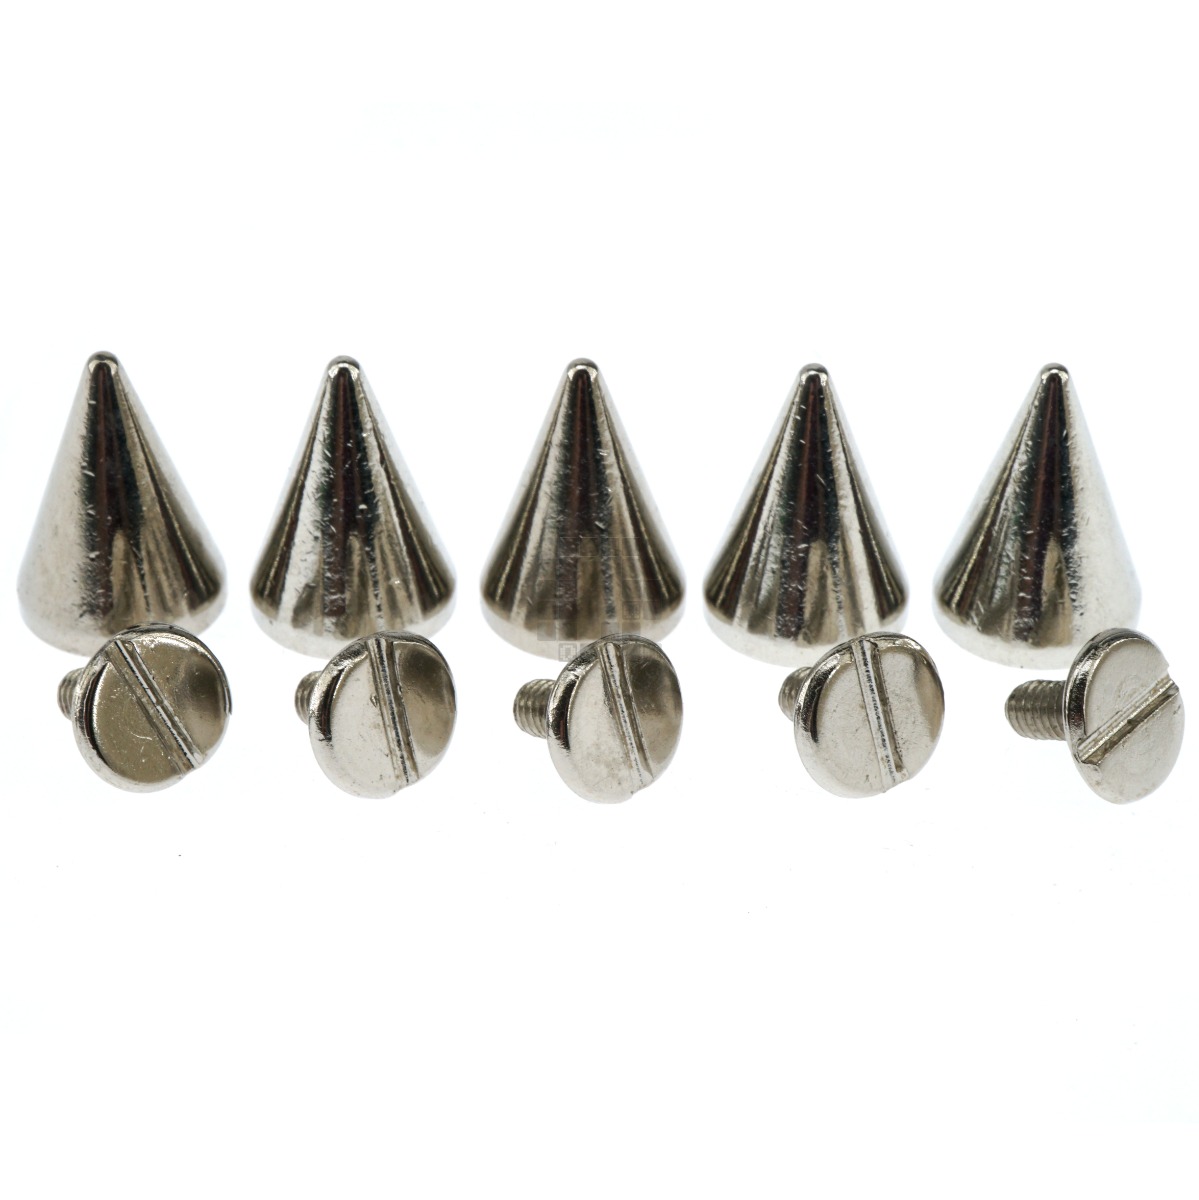 Silver Conical Spike 10x14mm, M3-0.5mm Threaded, 5 Pack